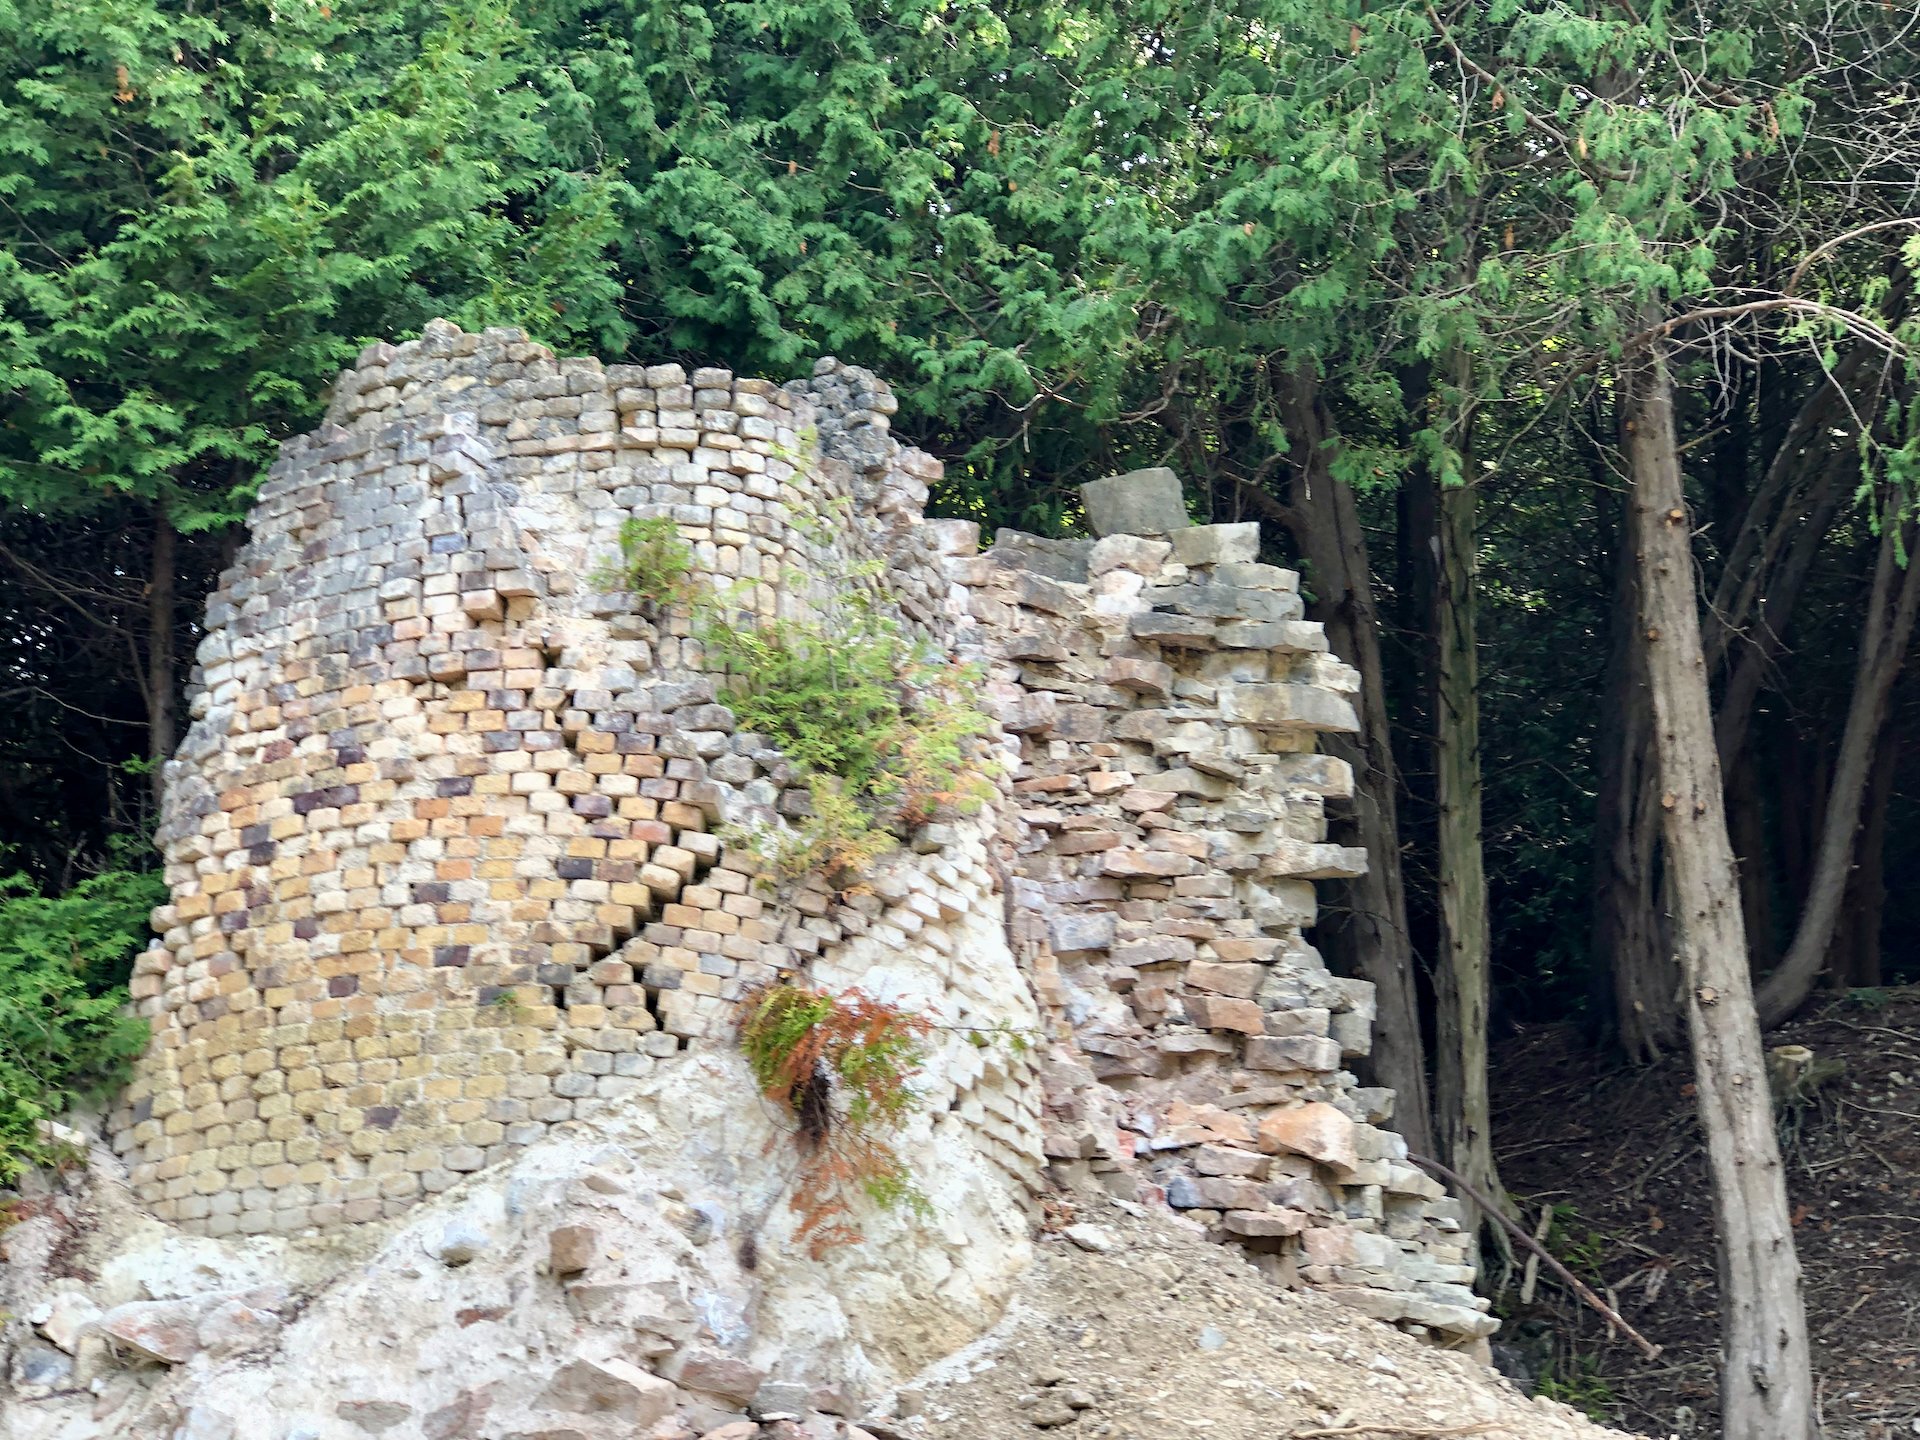  One of the coolest things are a series of old limestone kilns that Shawn and his team are trying to restore/save. 